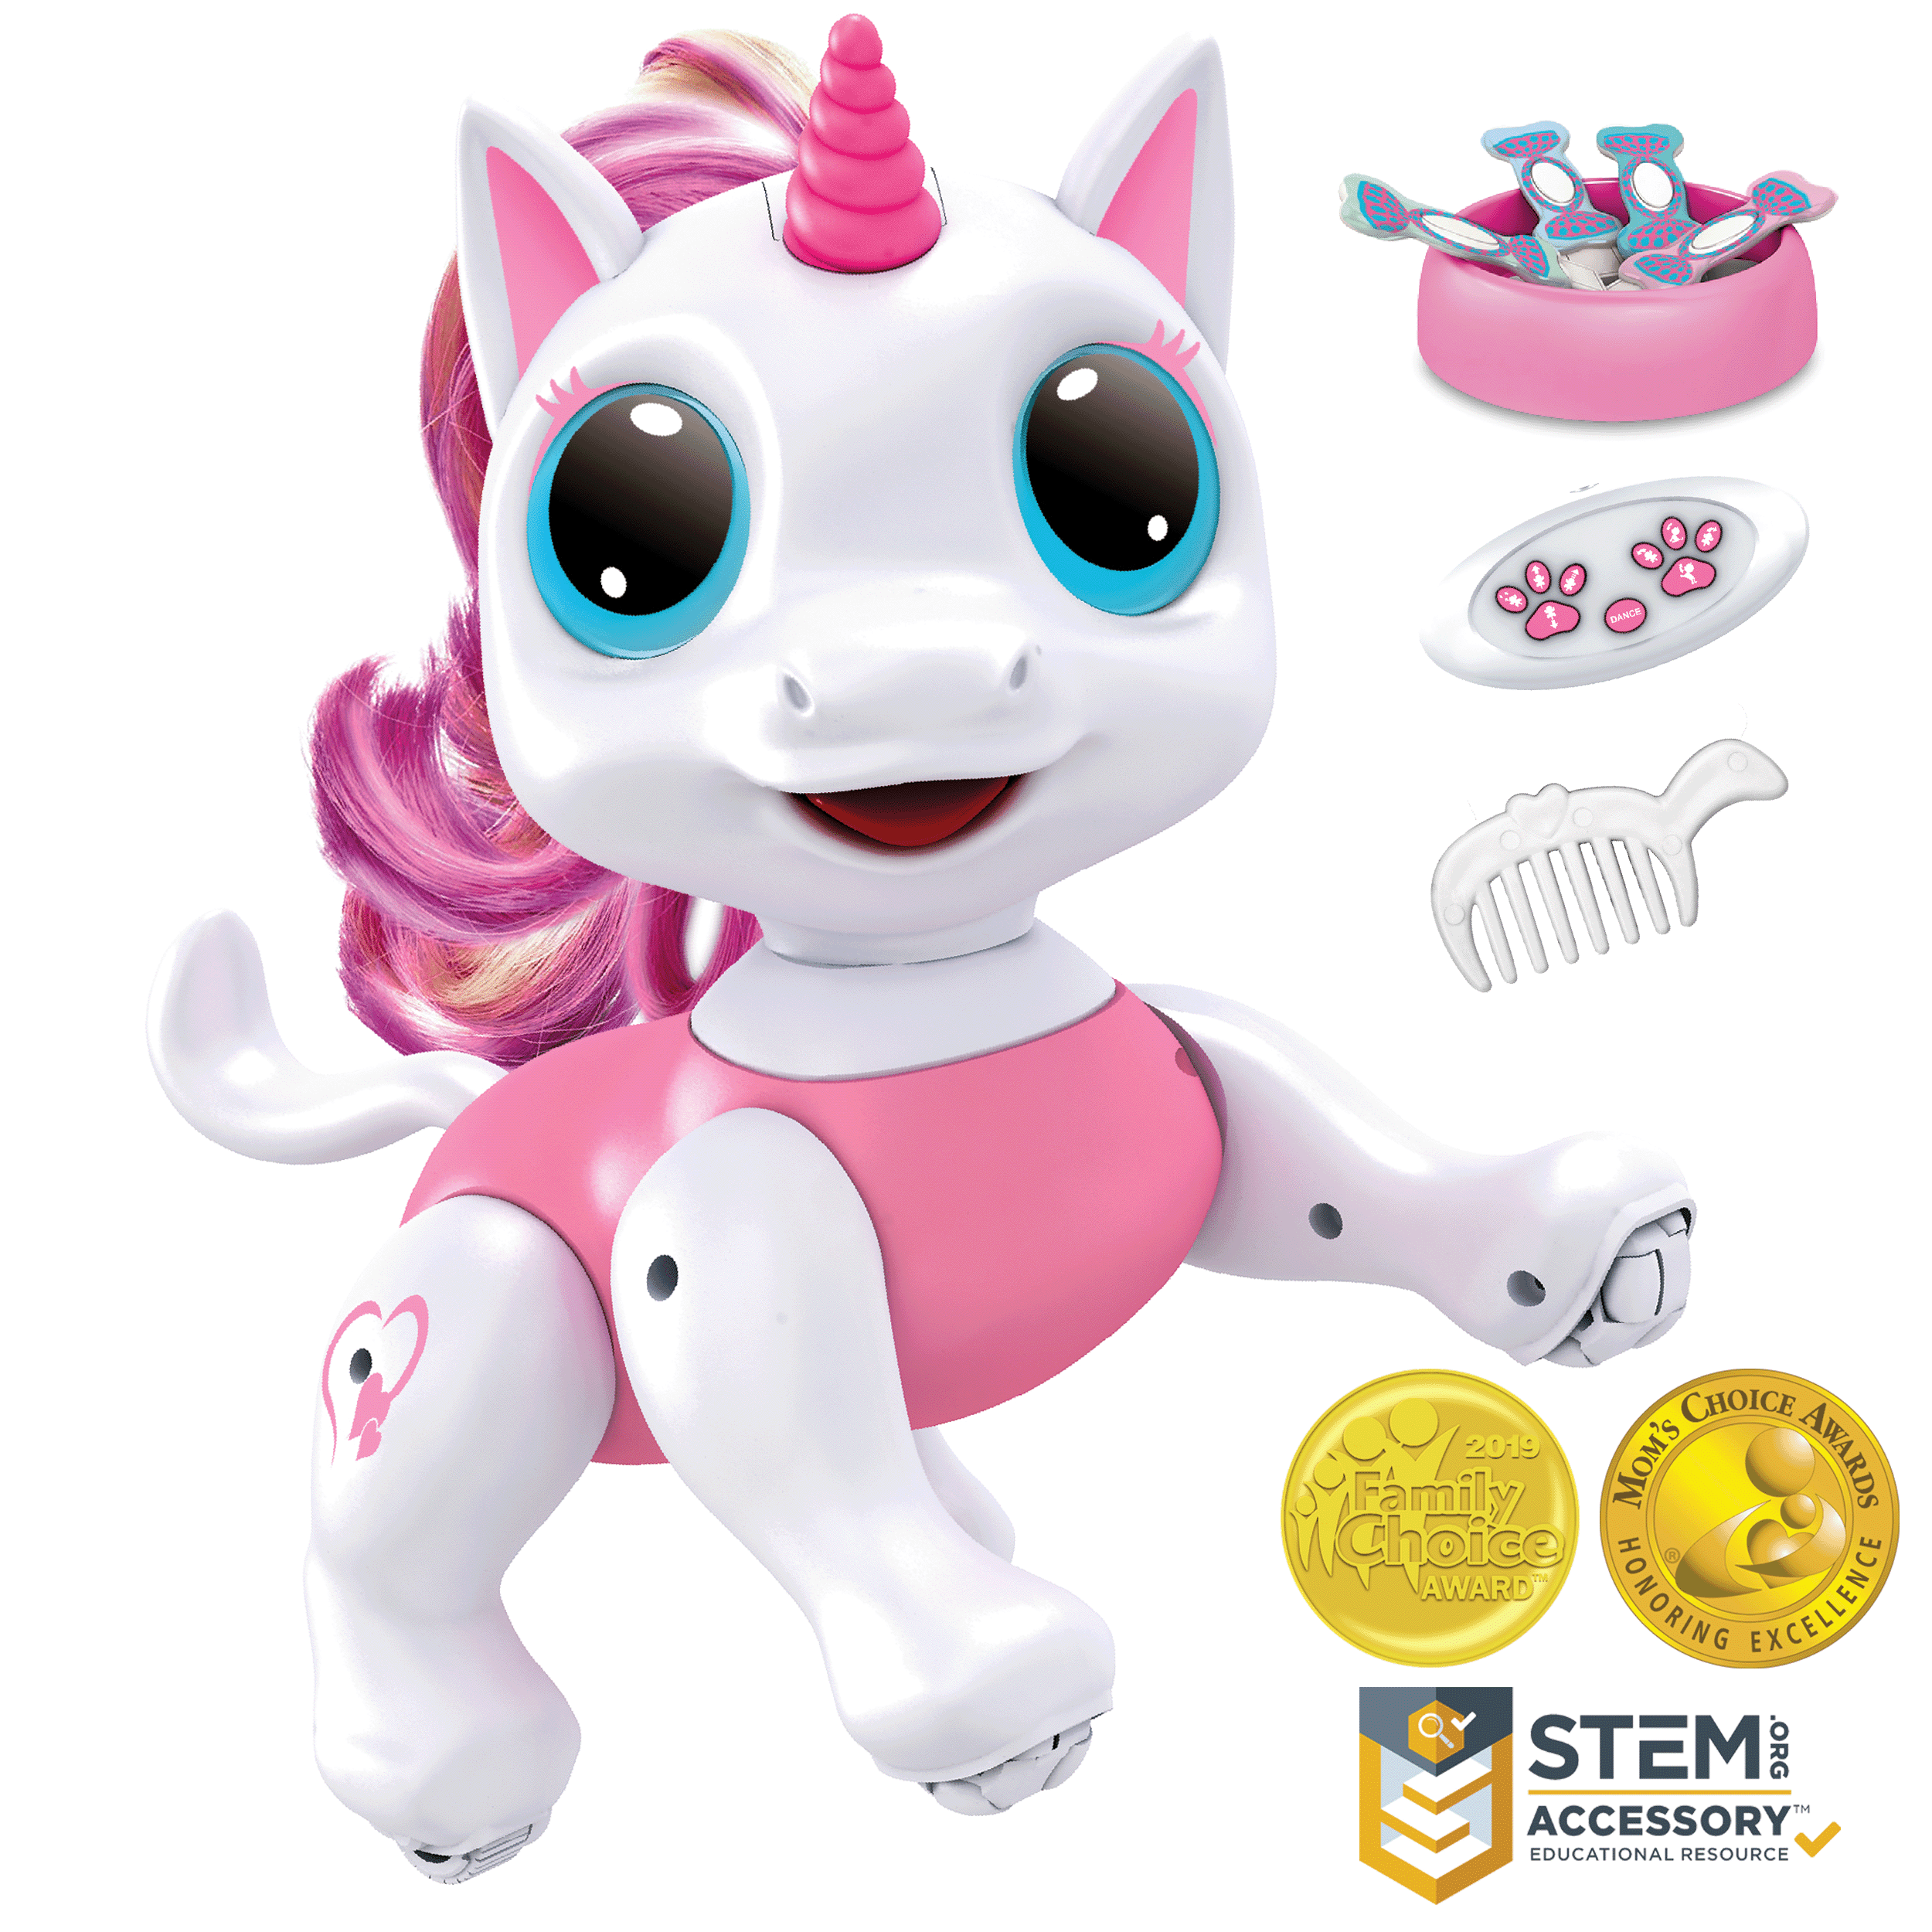 29 Magical Unicorn Gifts - Unicorn Presents for Kids and Adults